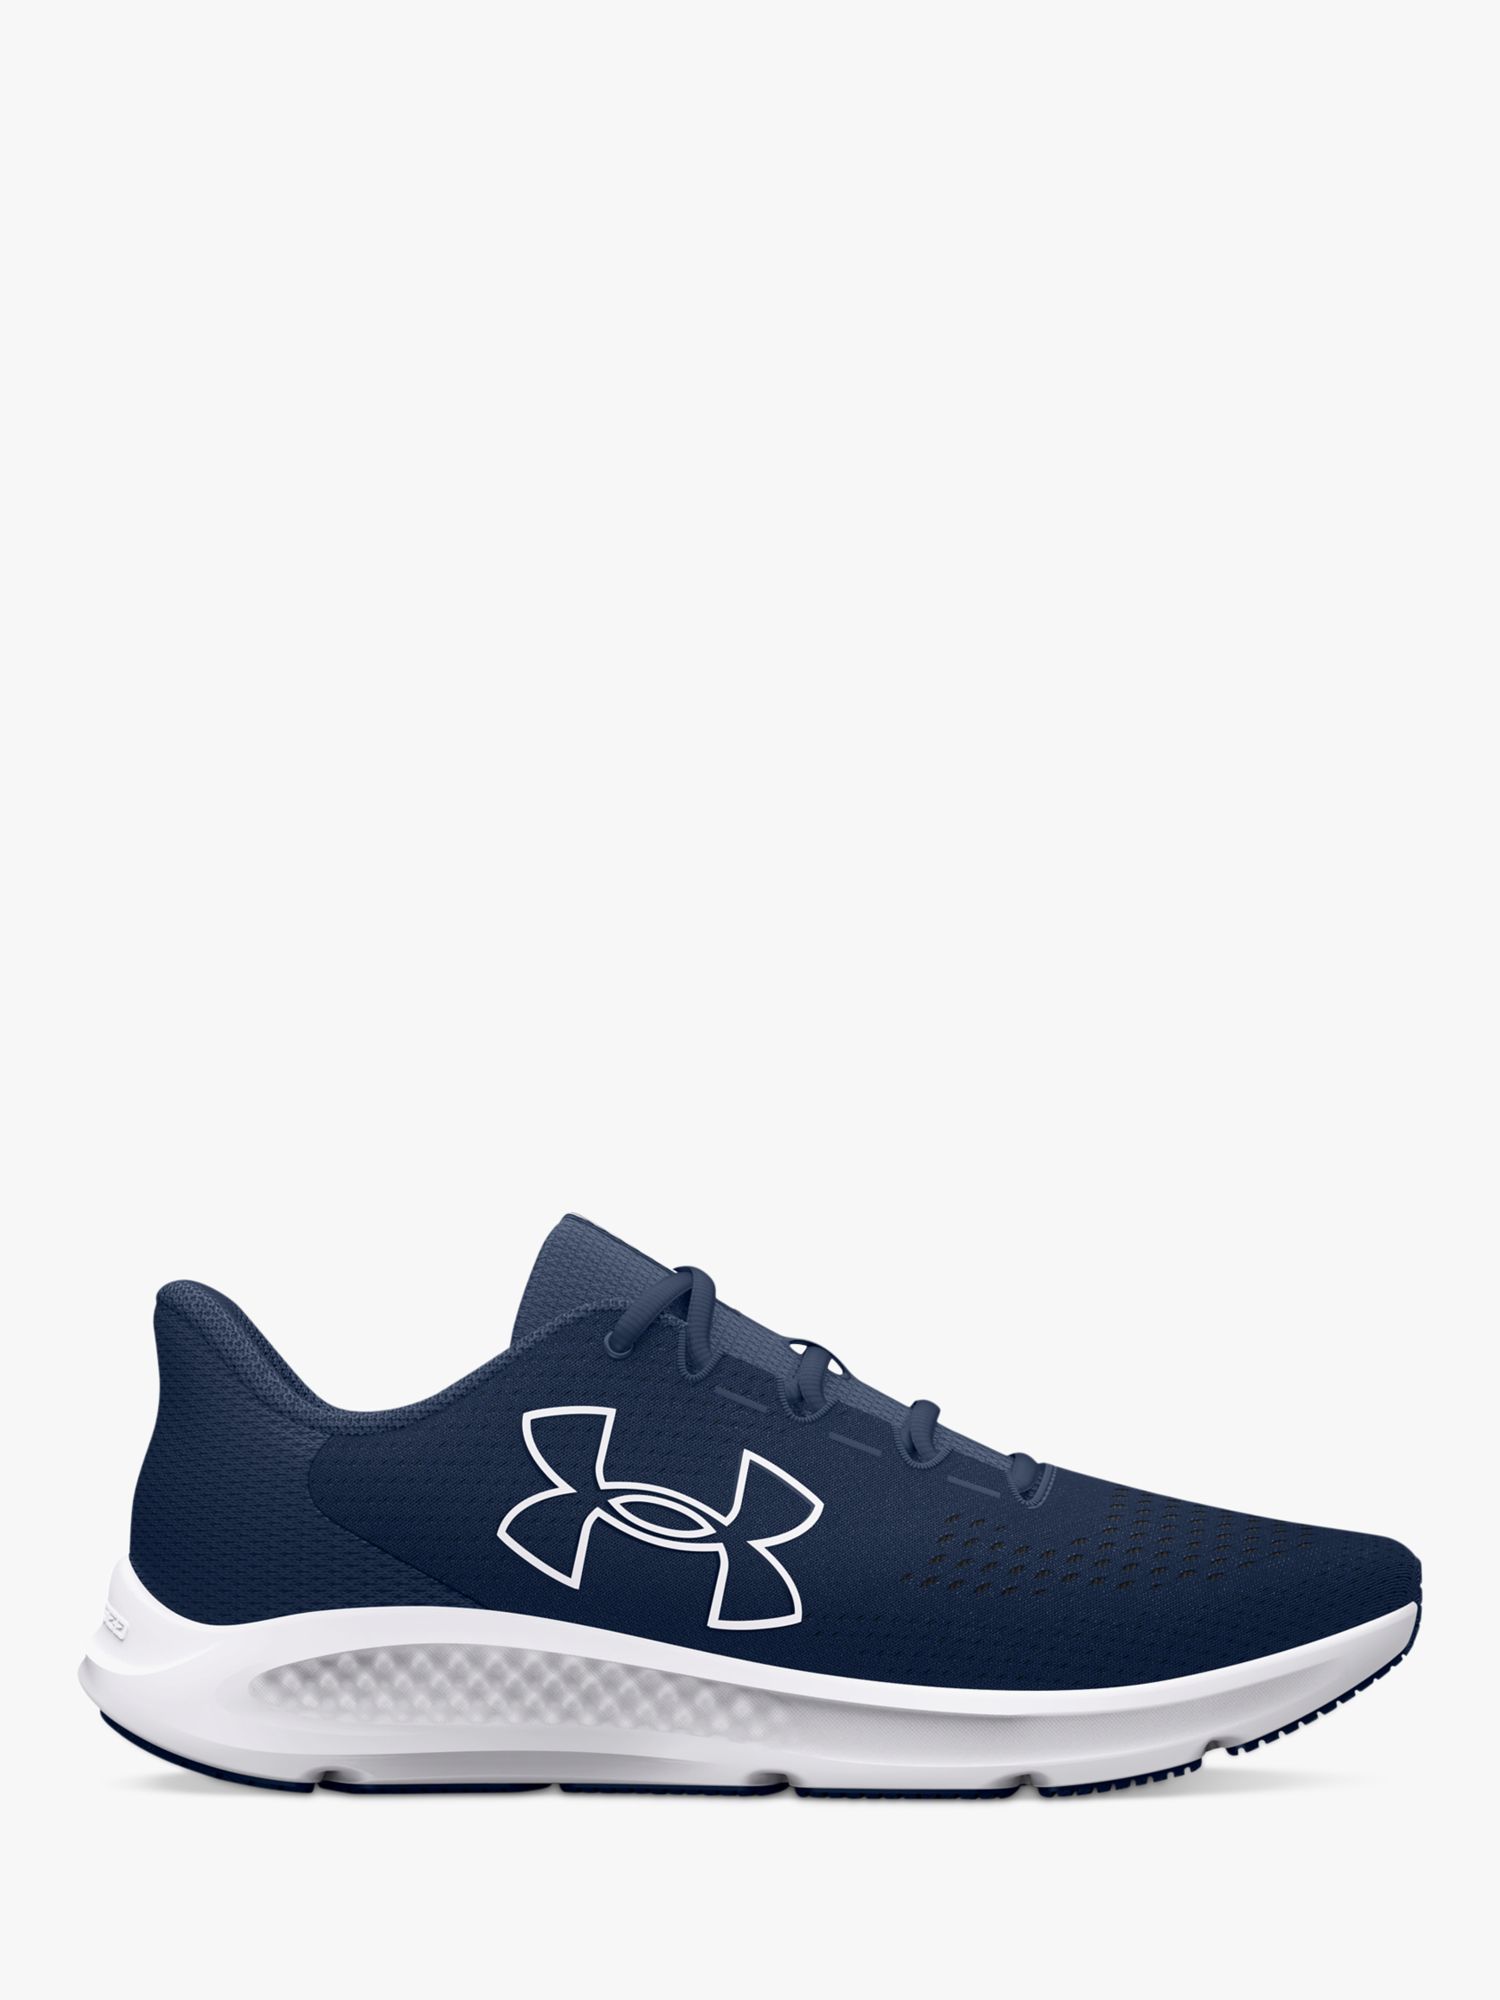 Under Armour Charged Pursuit 3 Big Logo Men's Running Shoes,  Academy/Academy/Wht at John Lewis & Partners